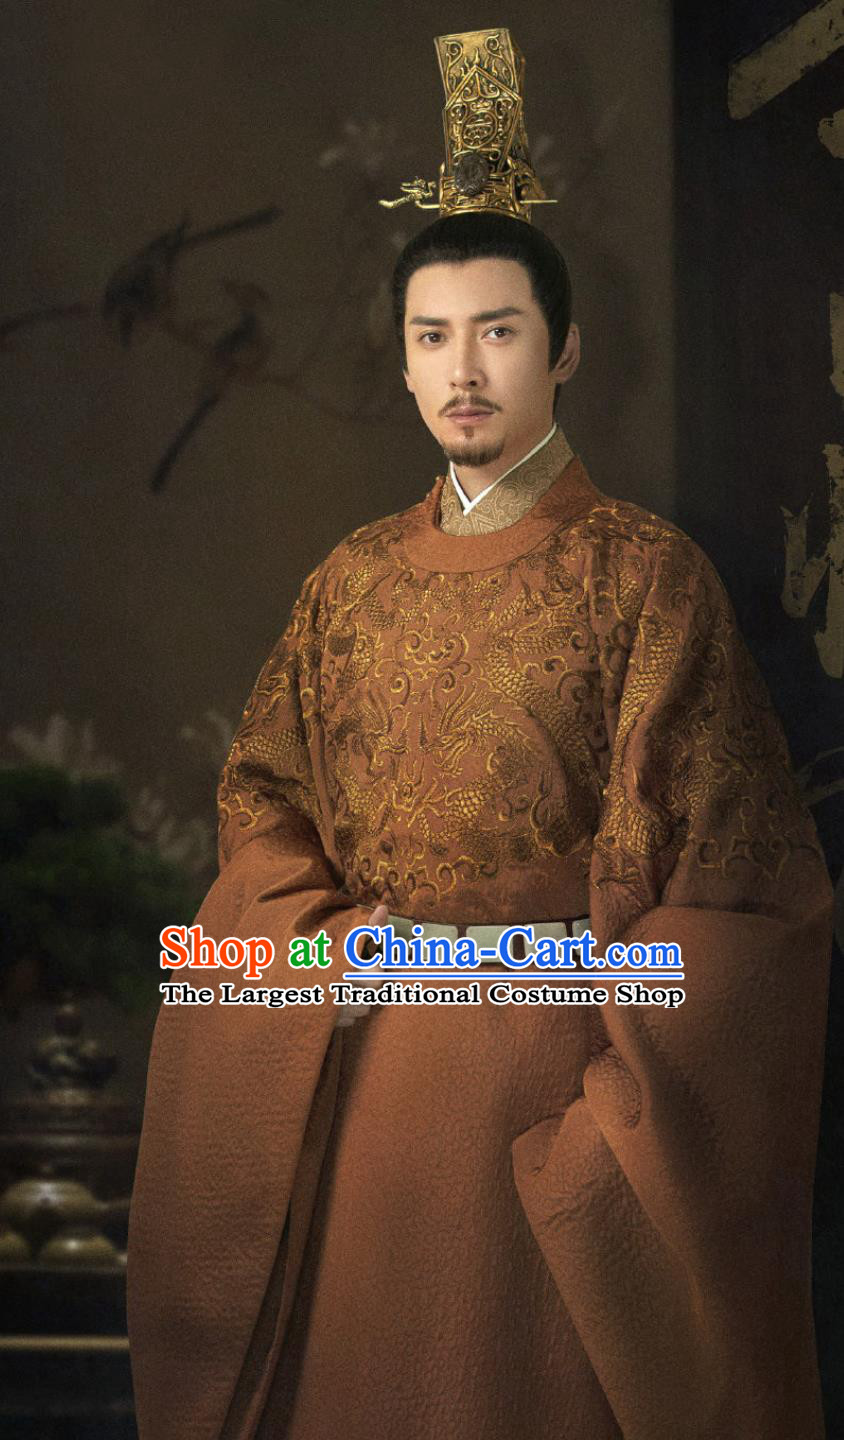 2020 TV Series The Promise of Chang An King of Shengzhou Garment Ancient Chinese Emperor Clothing China Traditional Royal Costume